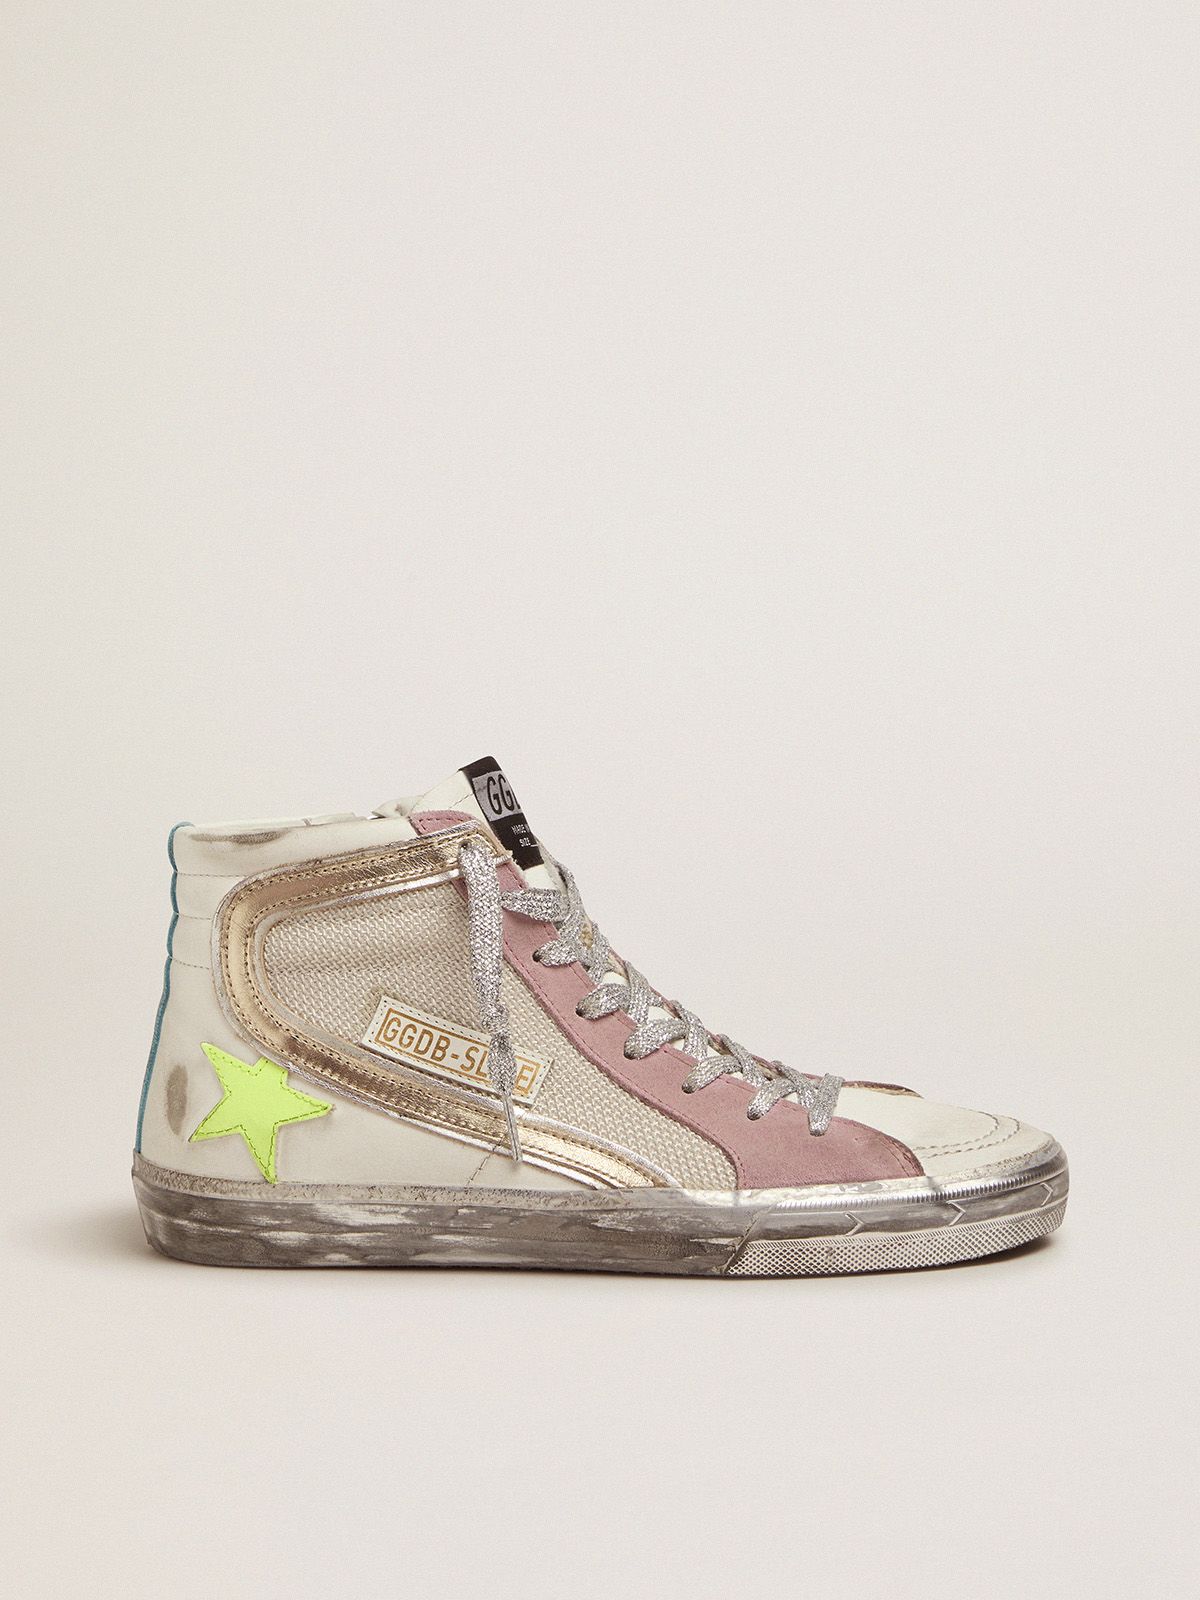 Slide sneakers with white and pink upper Golden Goose